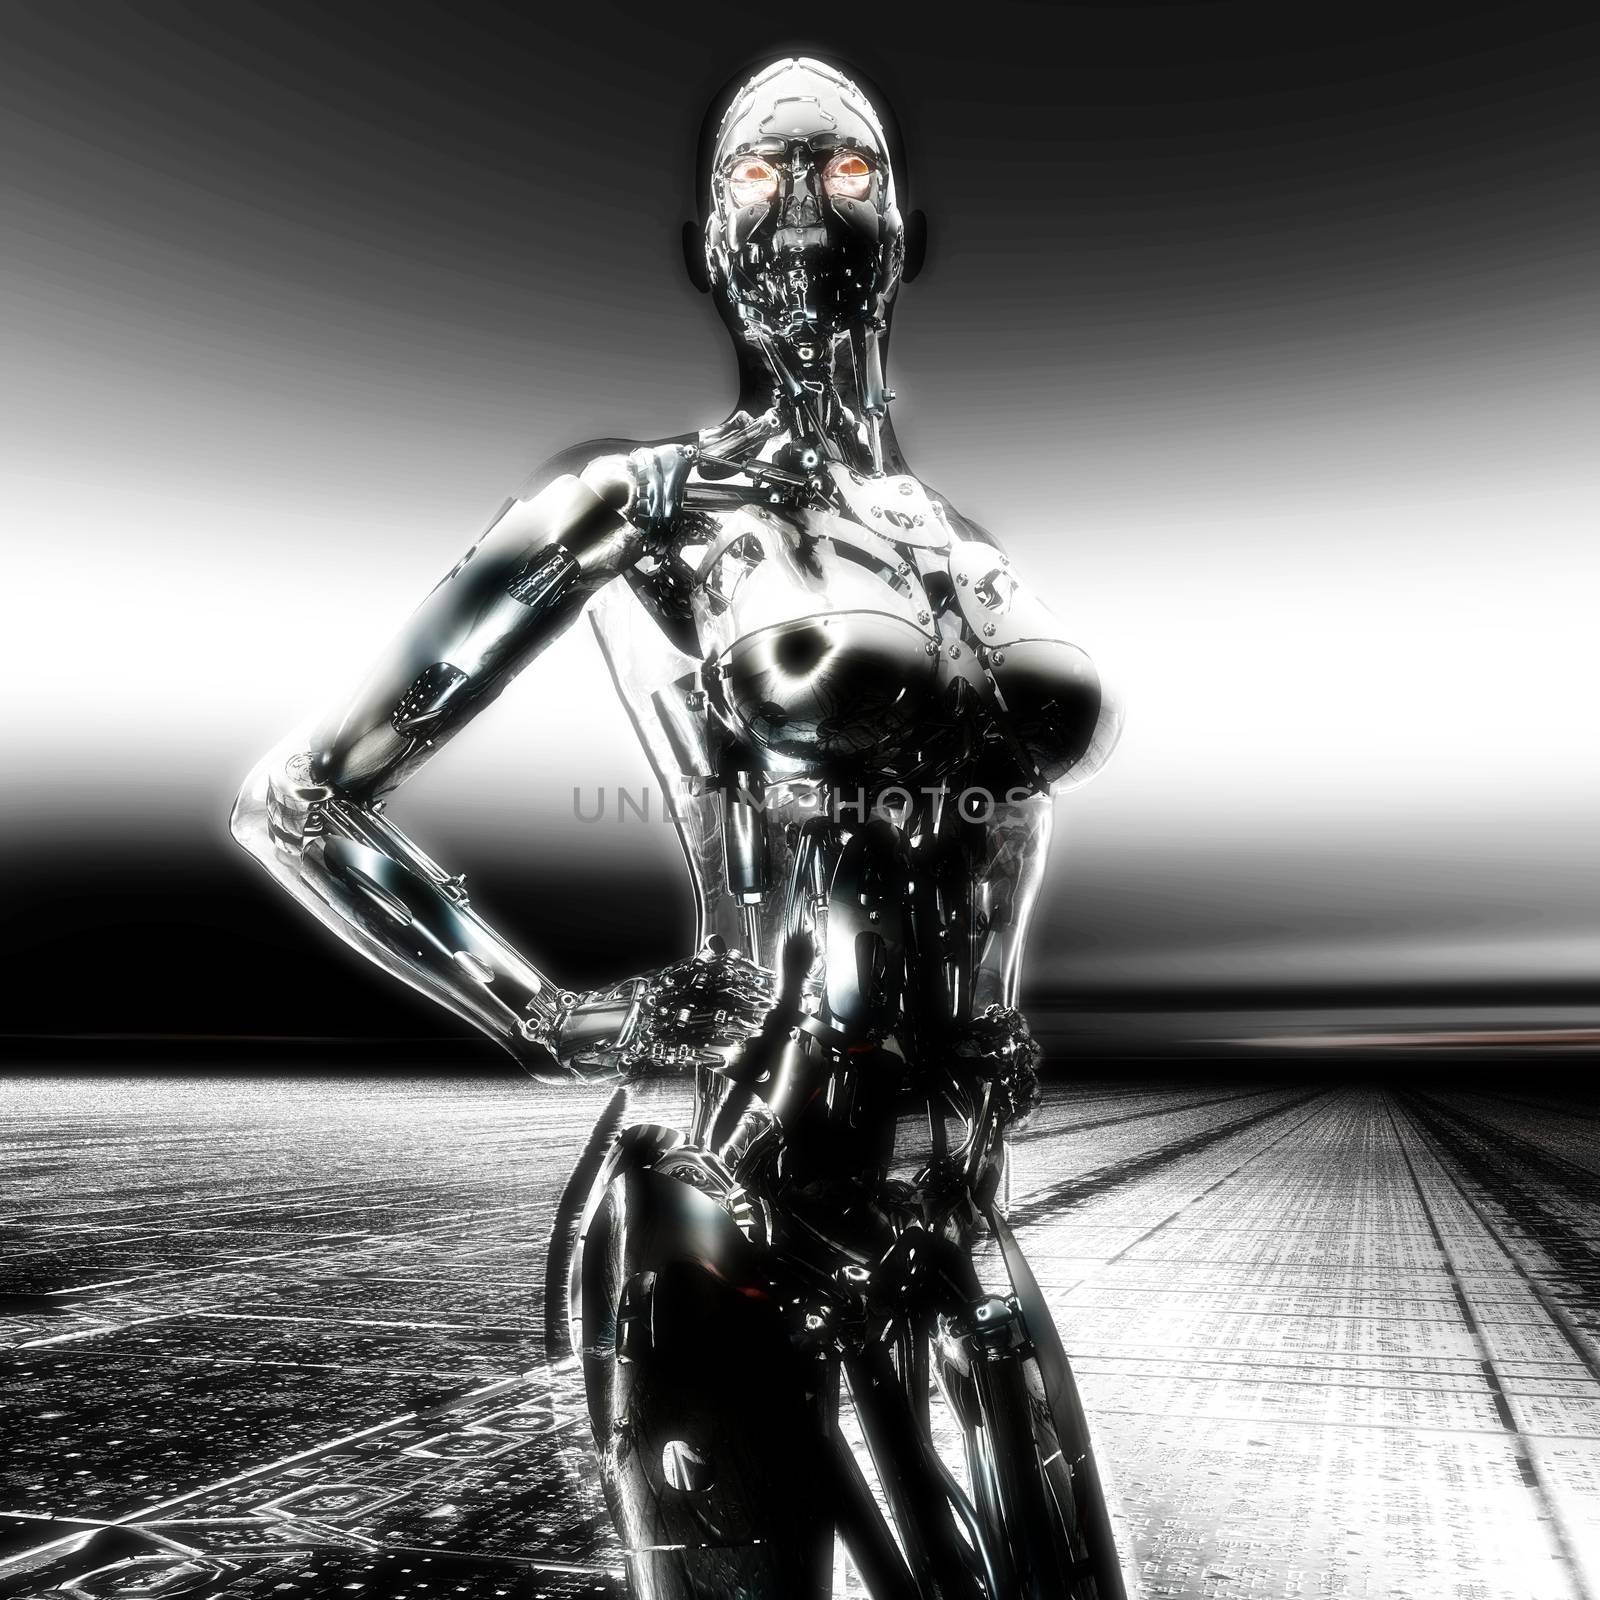 3D Illustration; 3D Rendering of a Cyborg by 3quarks